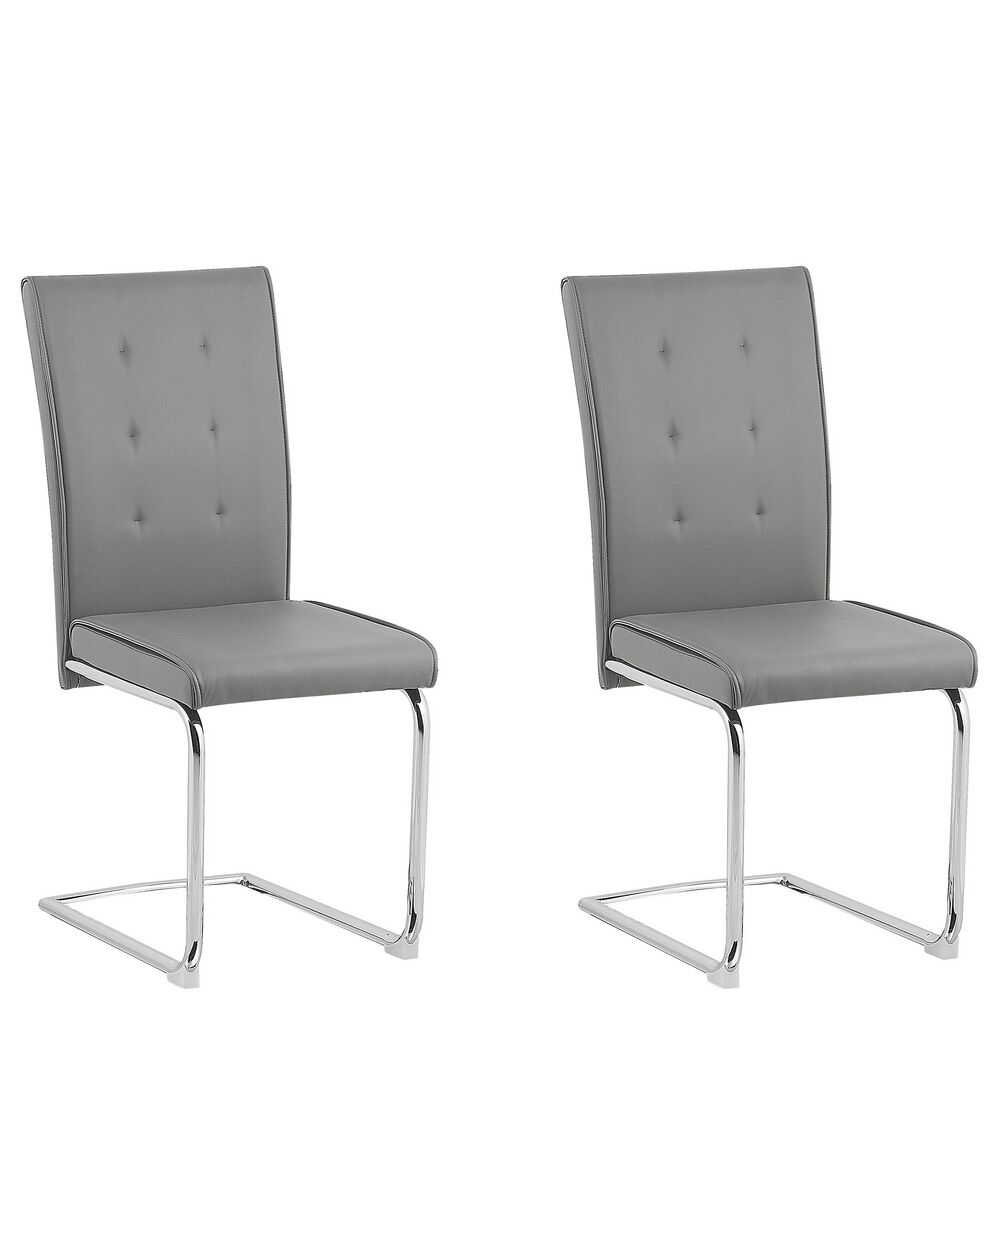 Set Of 2 Faux Leather Dining Chairs, Grey Leather Dining Chair